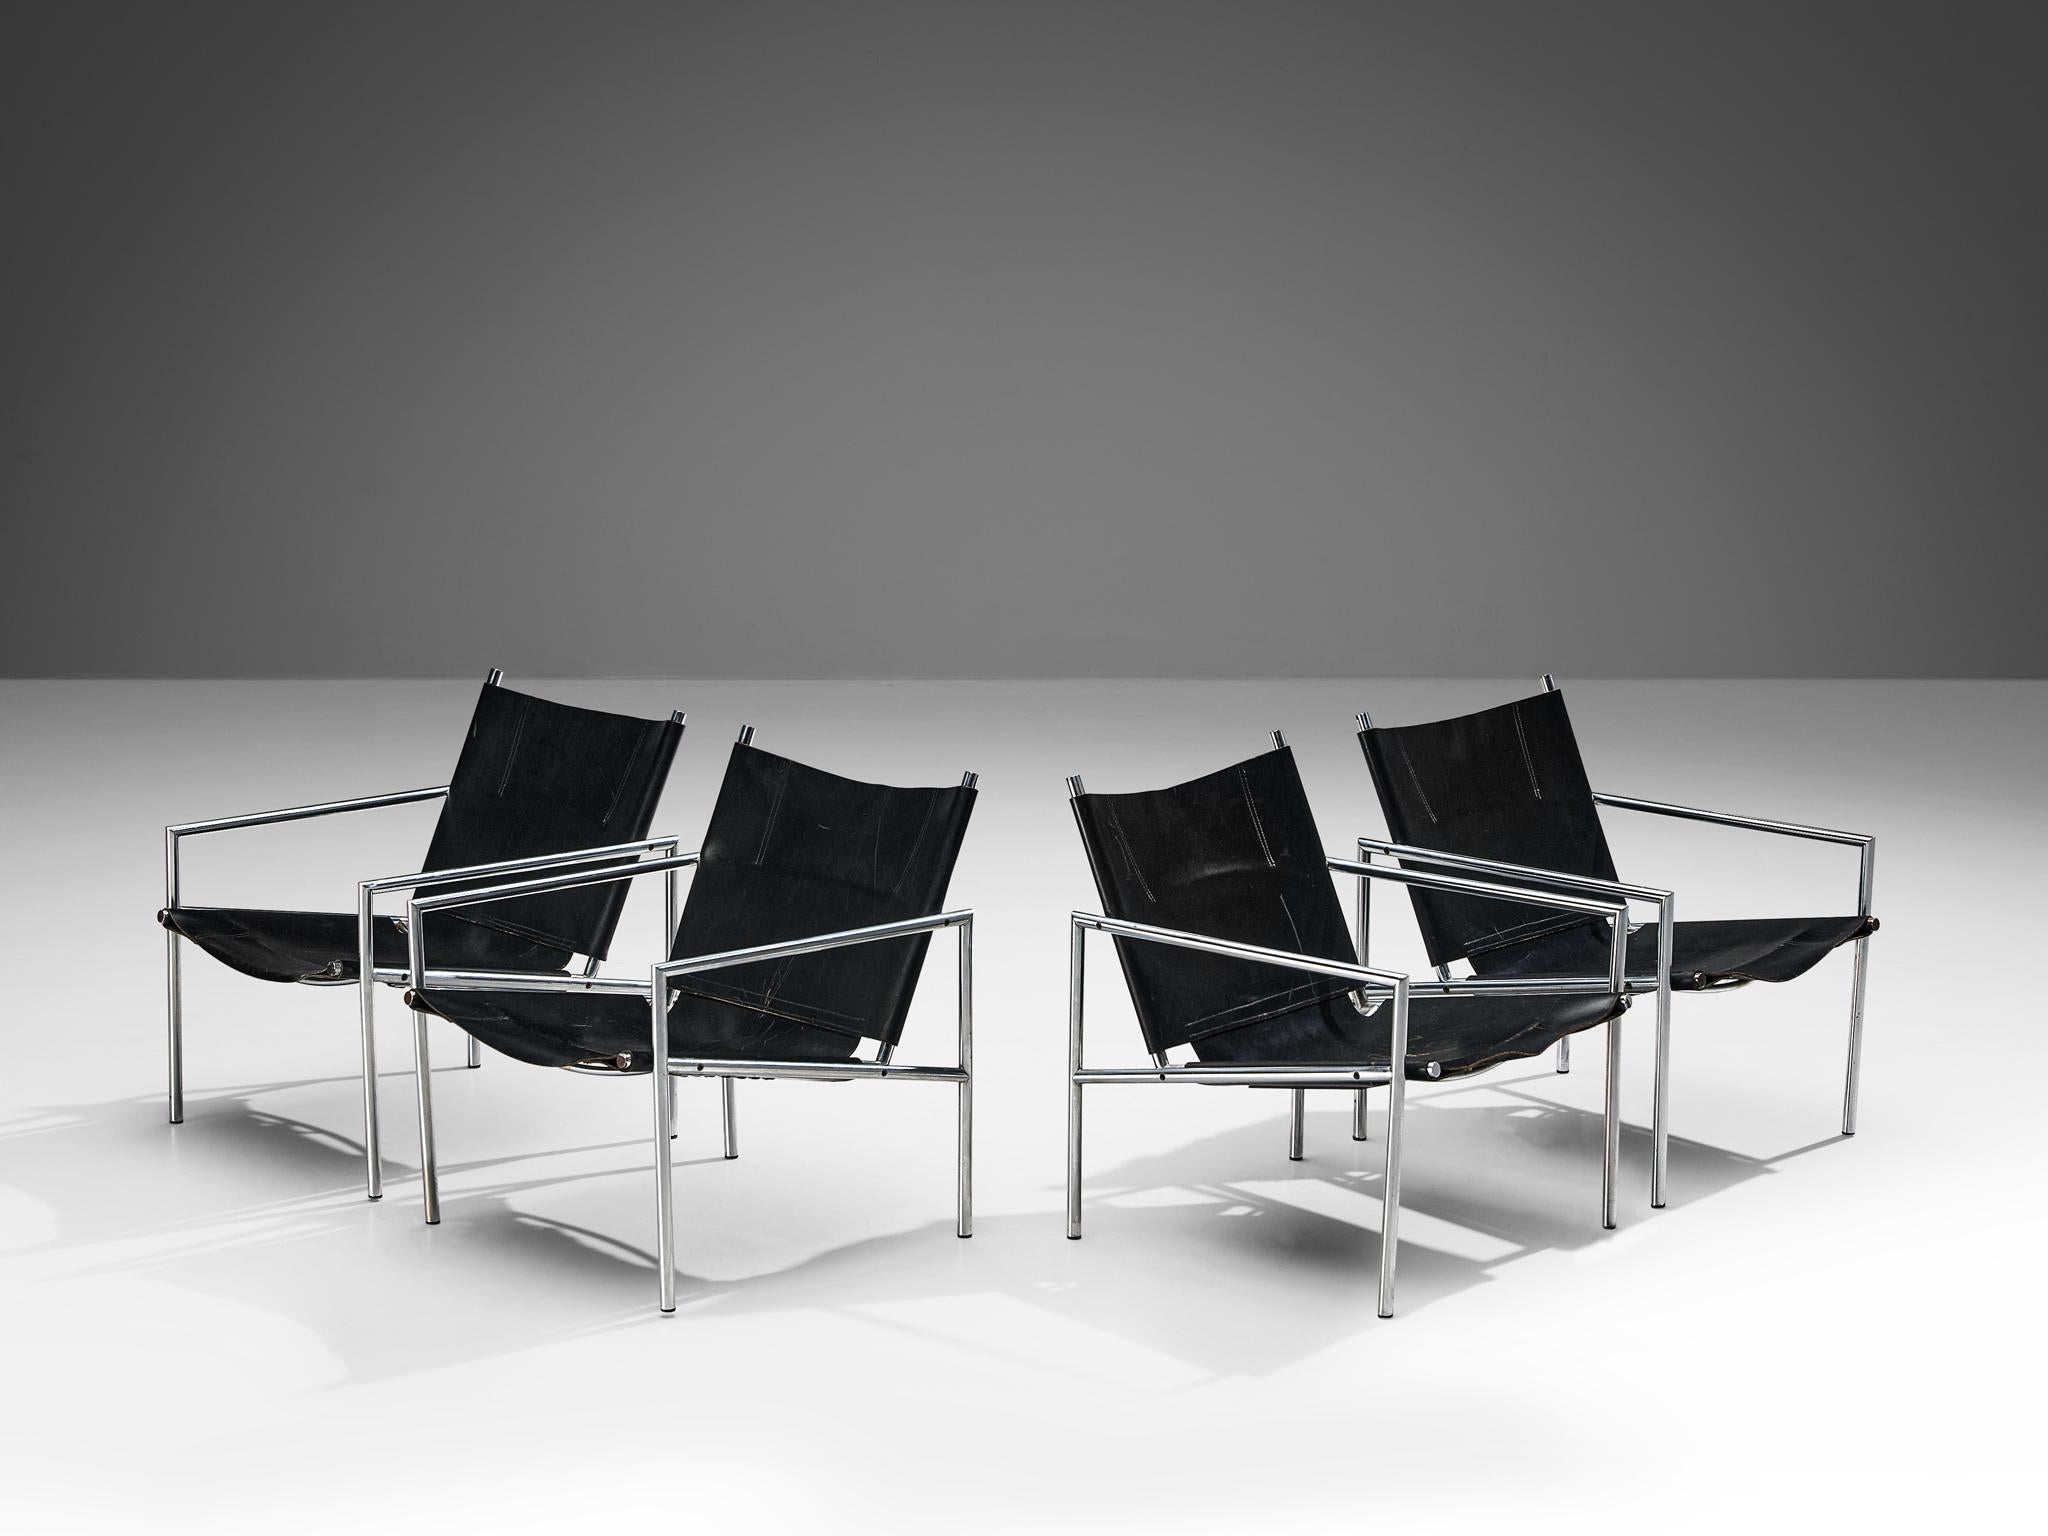 Martin Visser for 't Spectrum, set of four lounge chairs, model 'SZ 02', leather, brushed steel, The Netherlands, 1965

These modern, Minimalist easy chairs are made of a tubular brushed steel in combination with black leather upholstery. The open